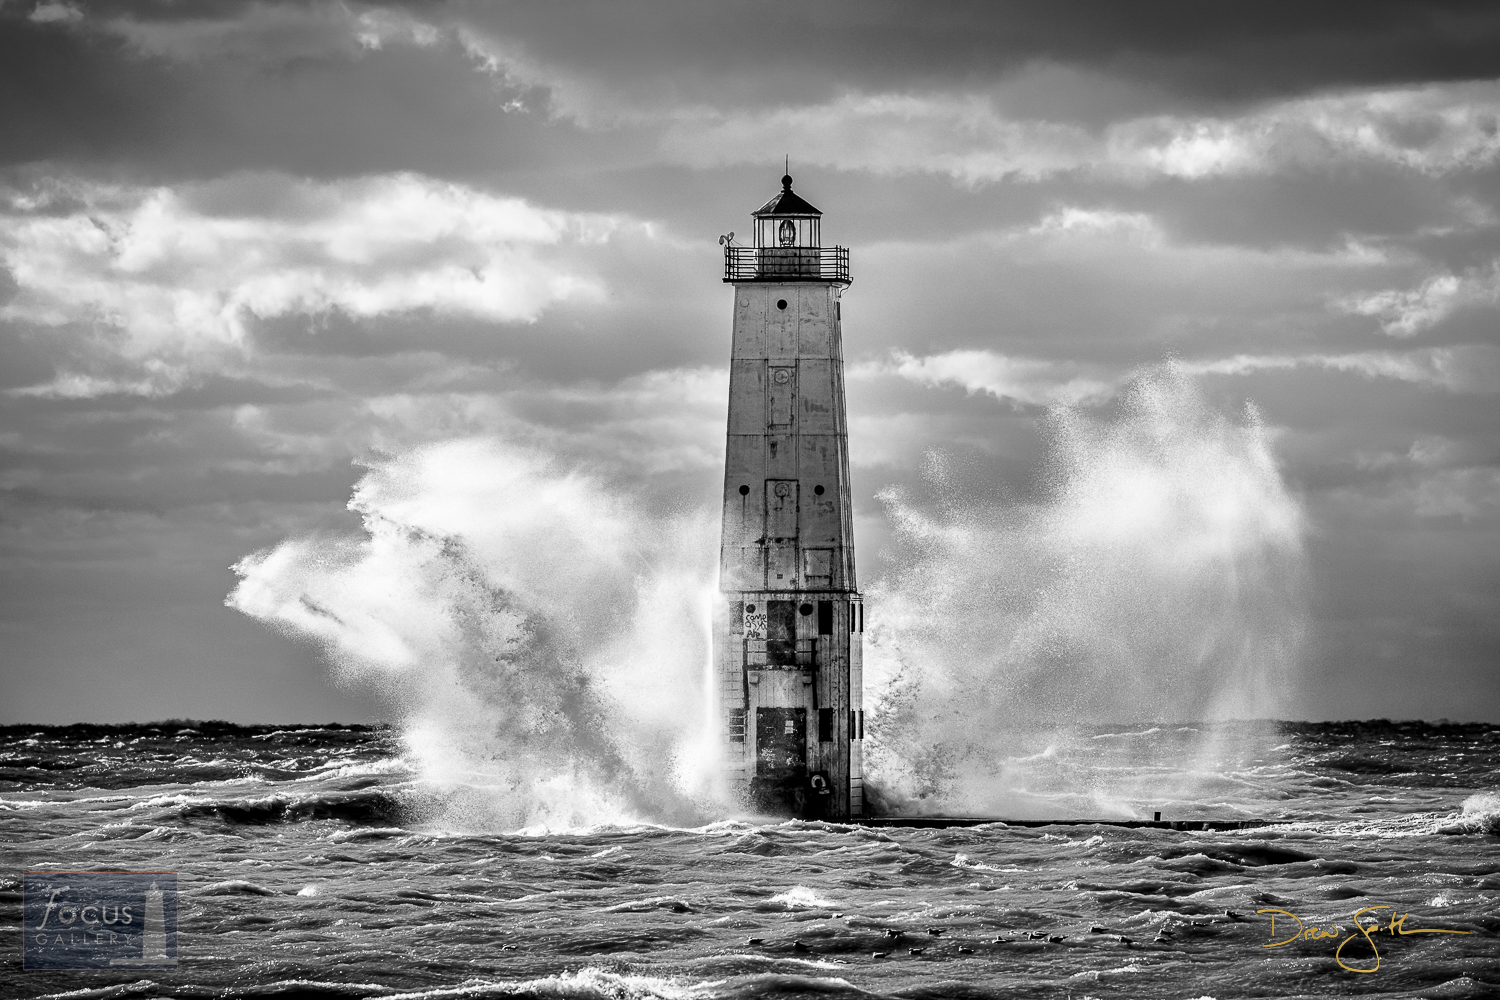 Photo © Drew SmithFew experiences give you a sense of the power of a Great Lake like watching huge waves roll in on windy days...